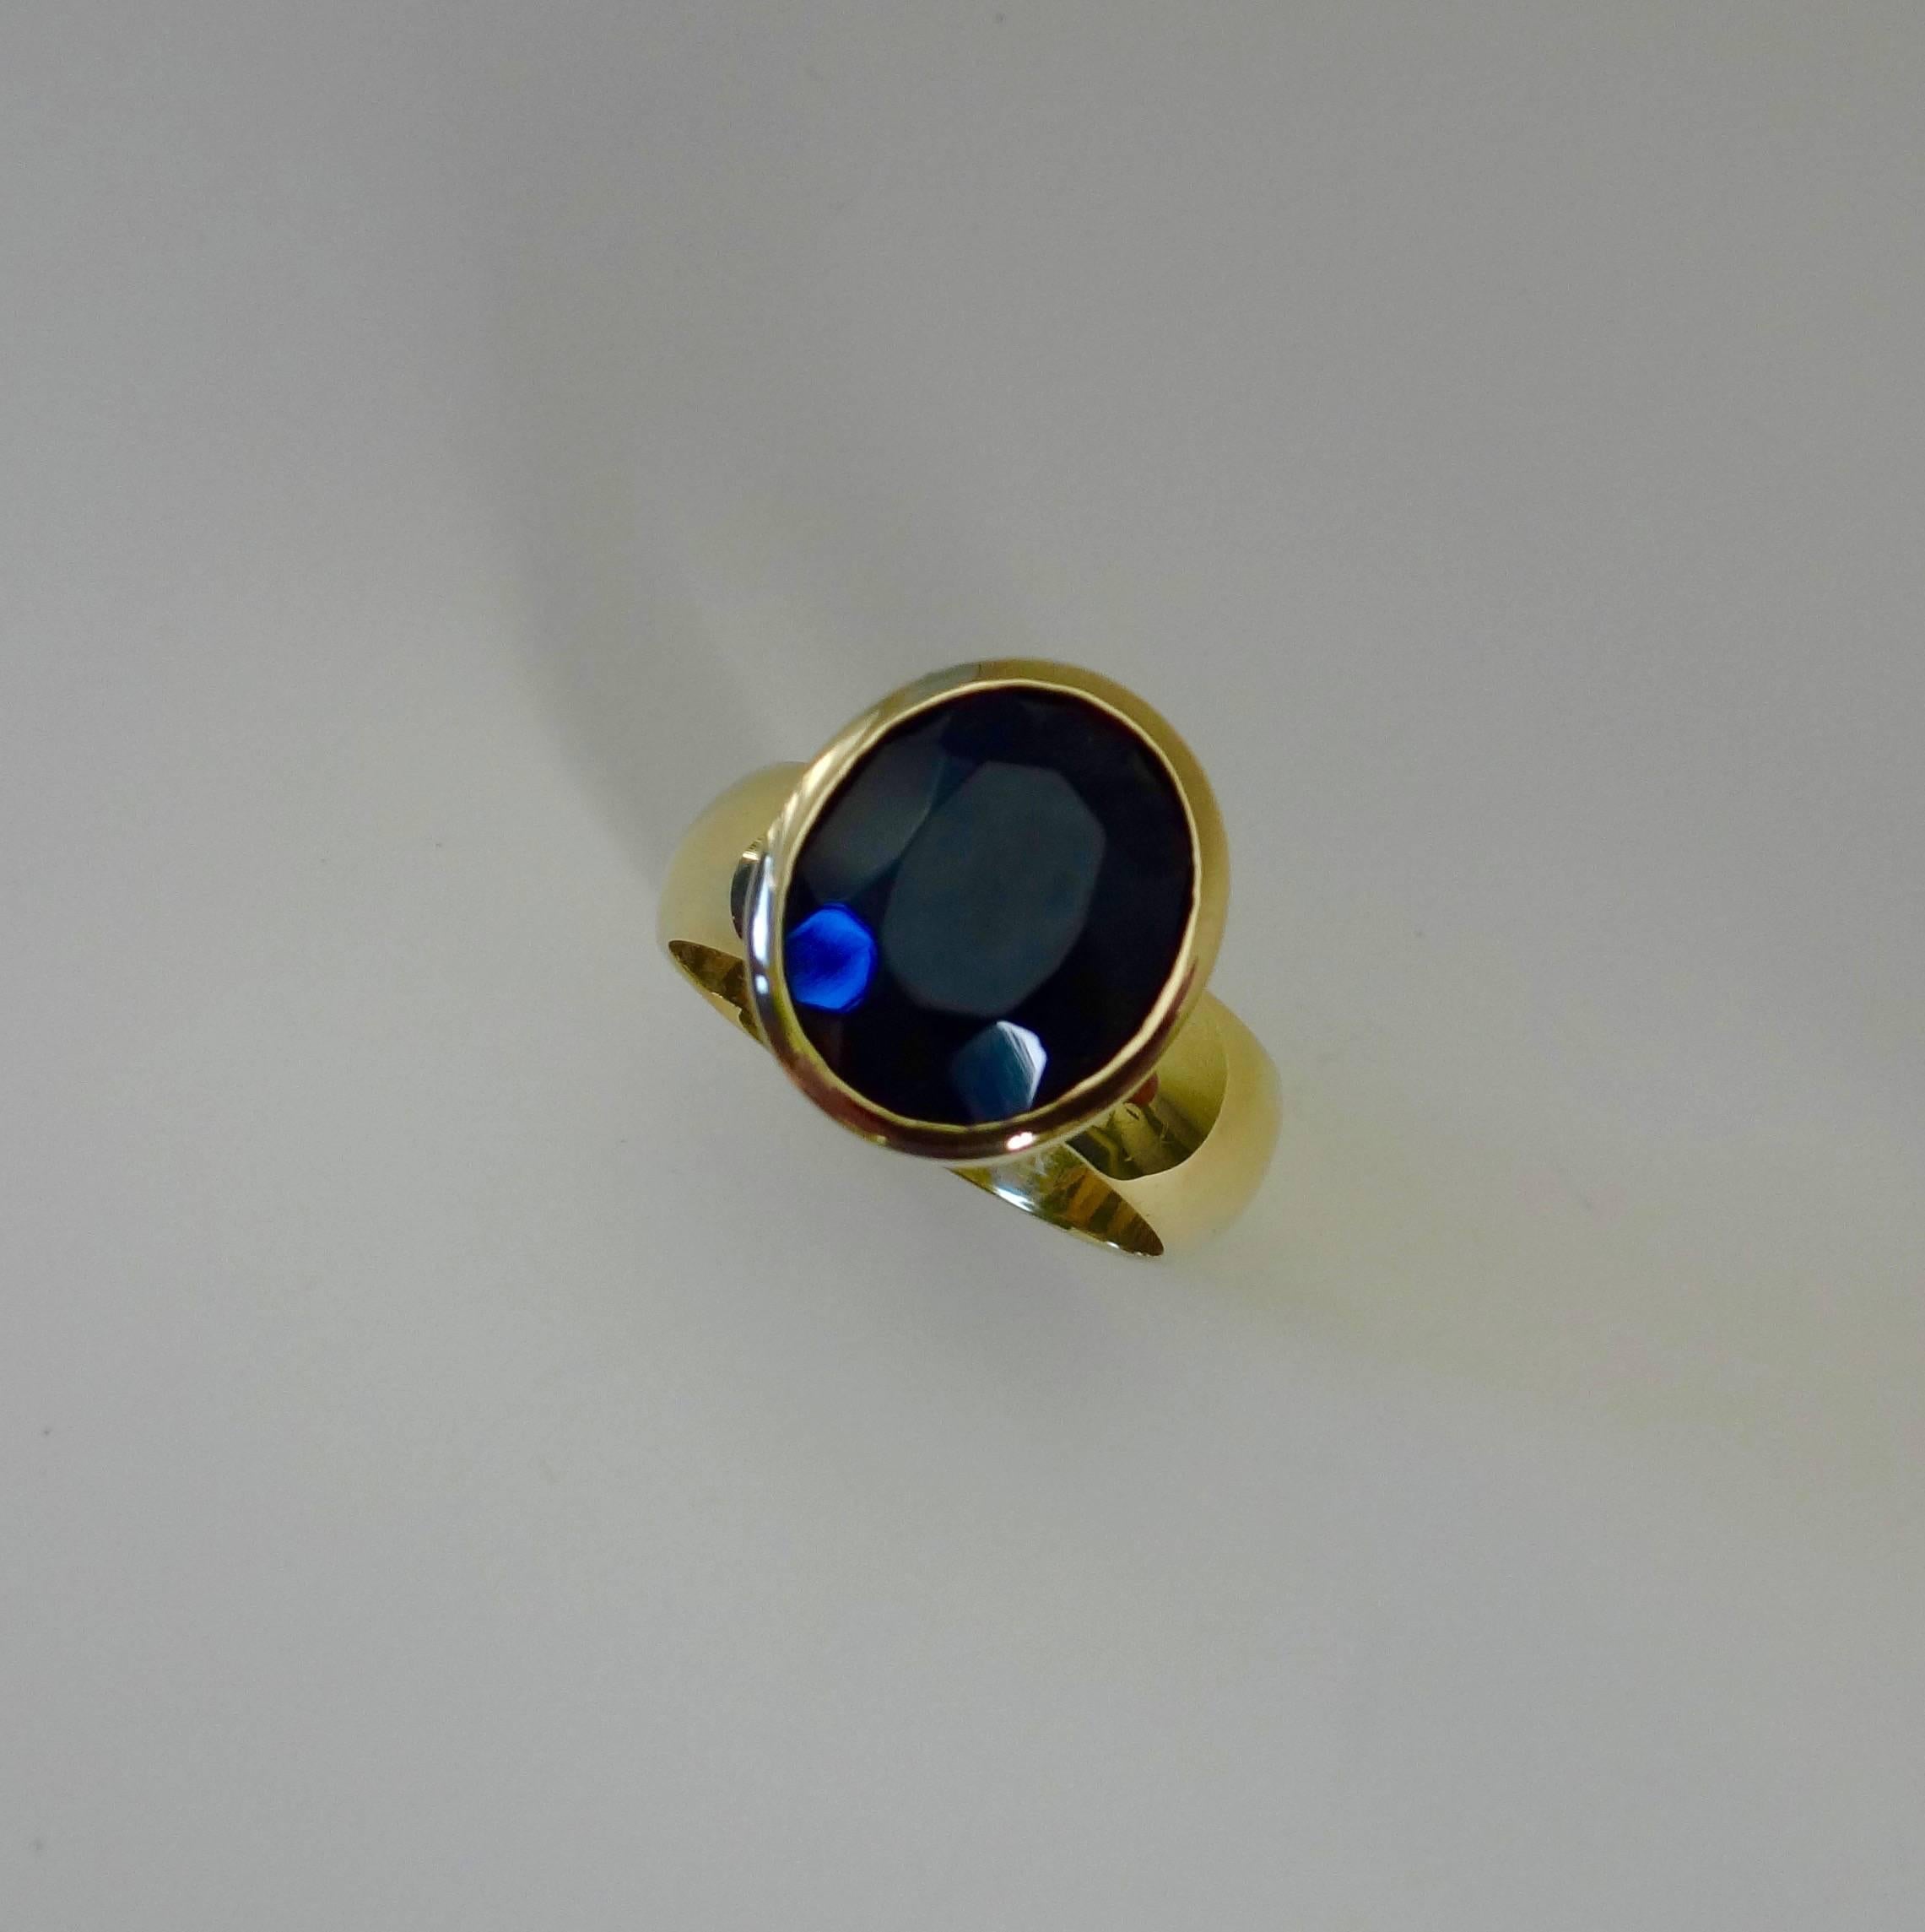 A faceted and oval shaped black spinel is bezel set in this 18k yellow gold Leah ring.  The beaded detail around the bezel adds interest.  Leah rings look lovely all by themselves but are dramatic stacked together in different colors and shapes. 